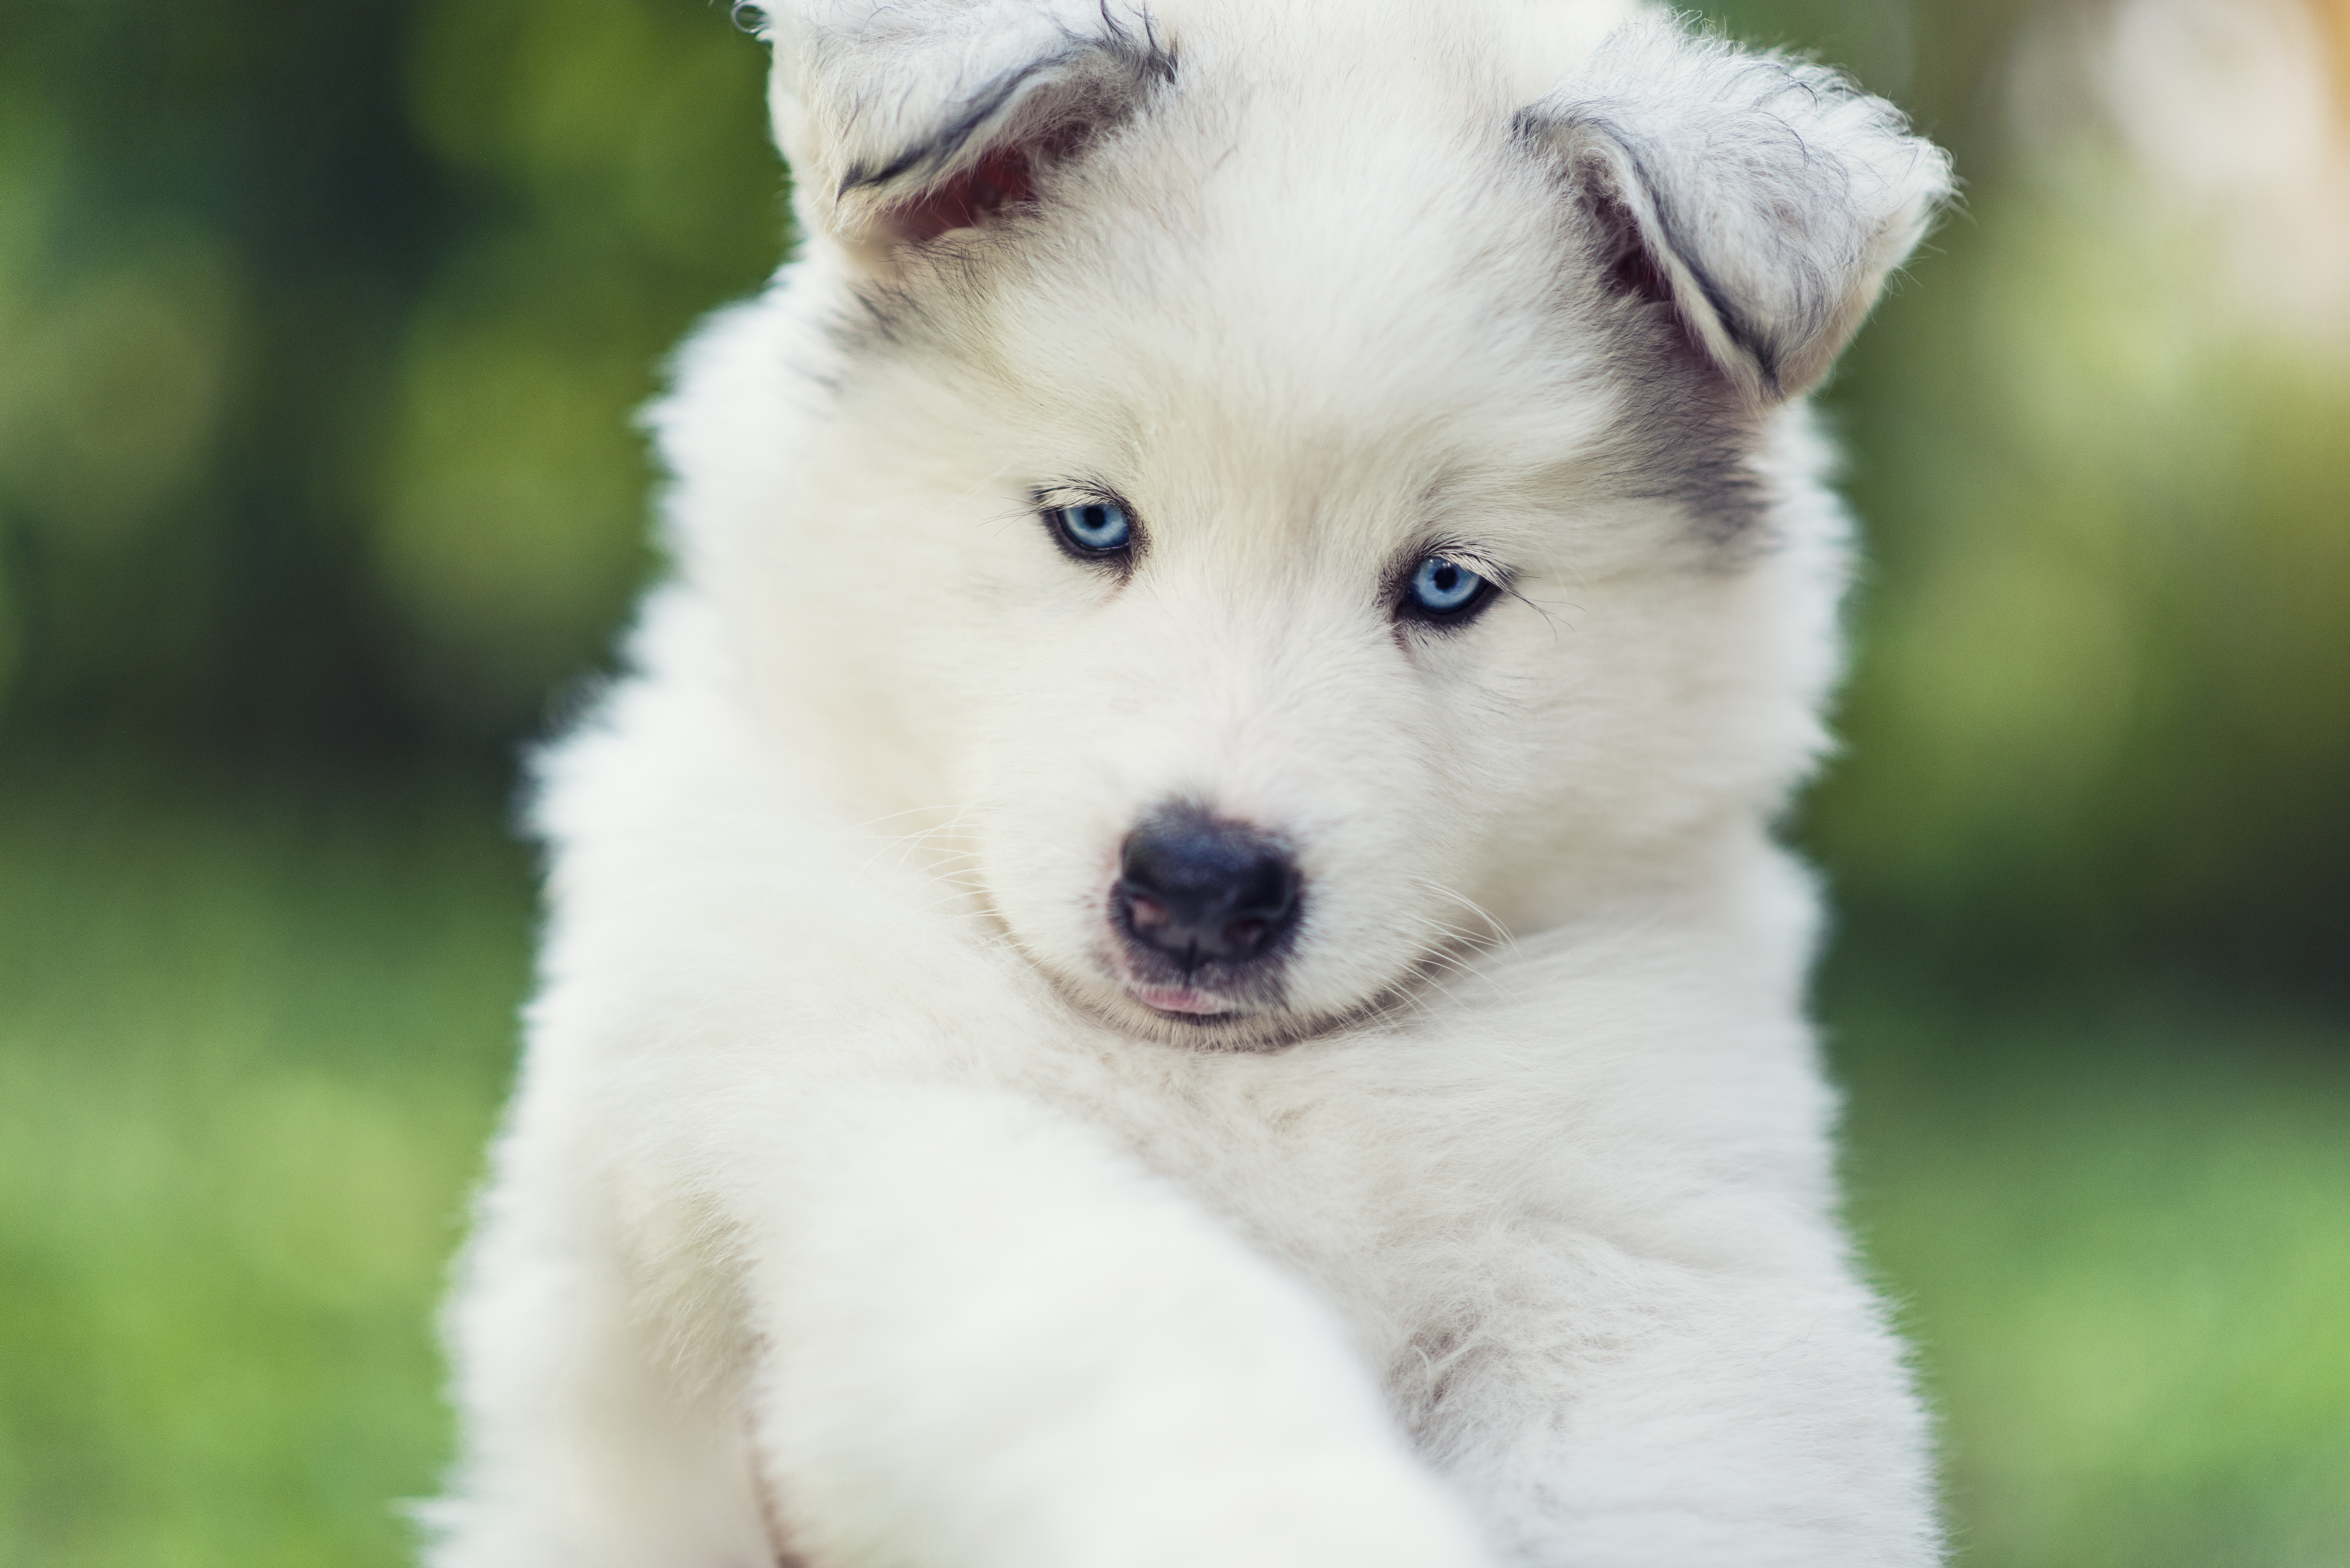 Samusky Mixed Dog Breed Pictures